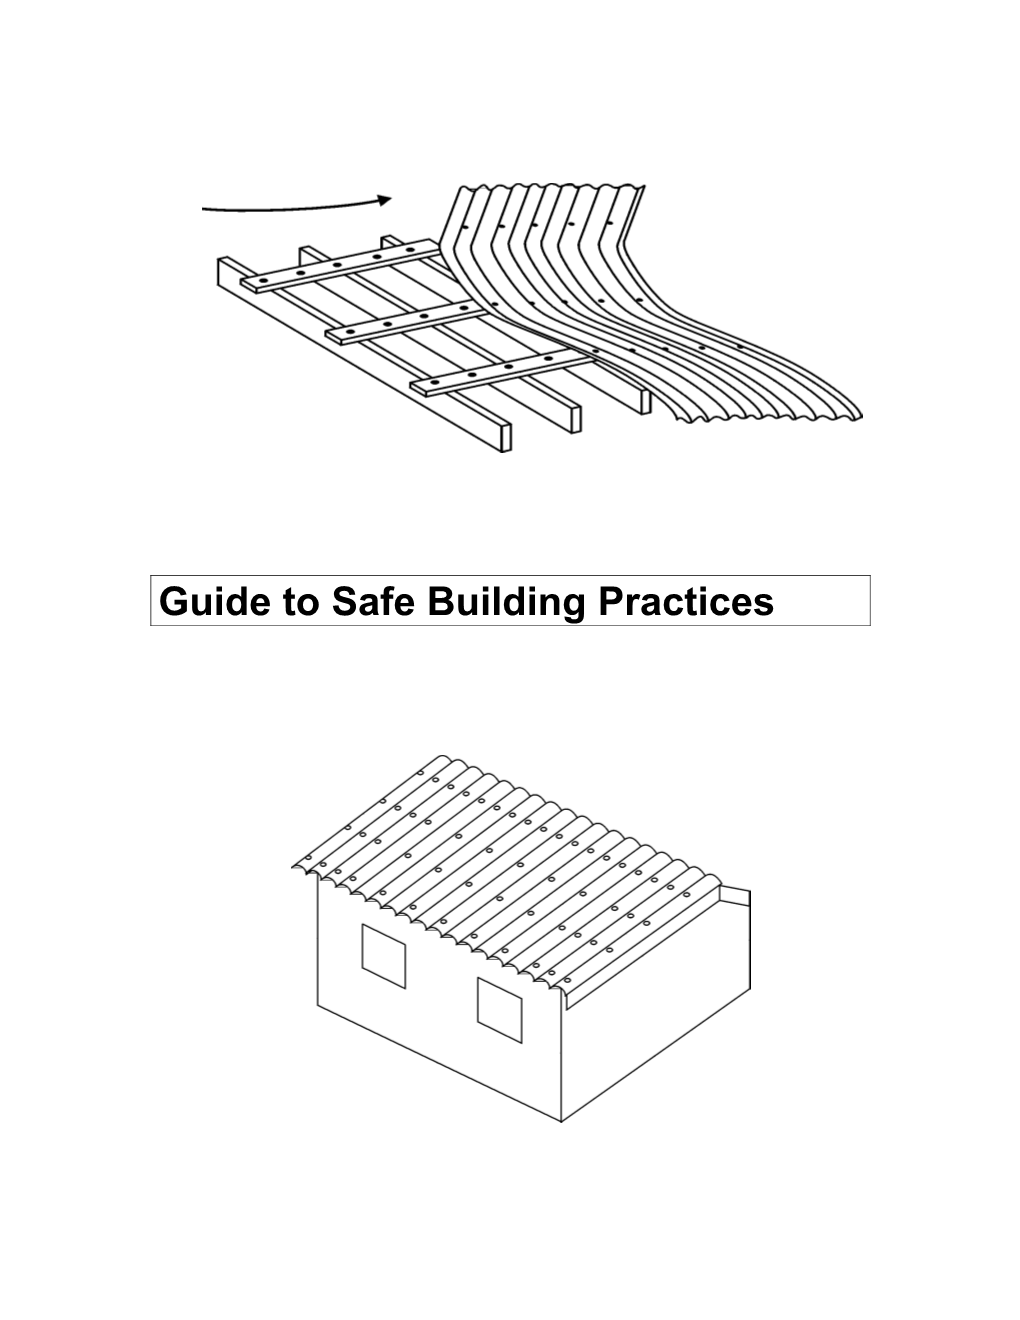 Guide to Safe Building Practices